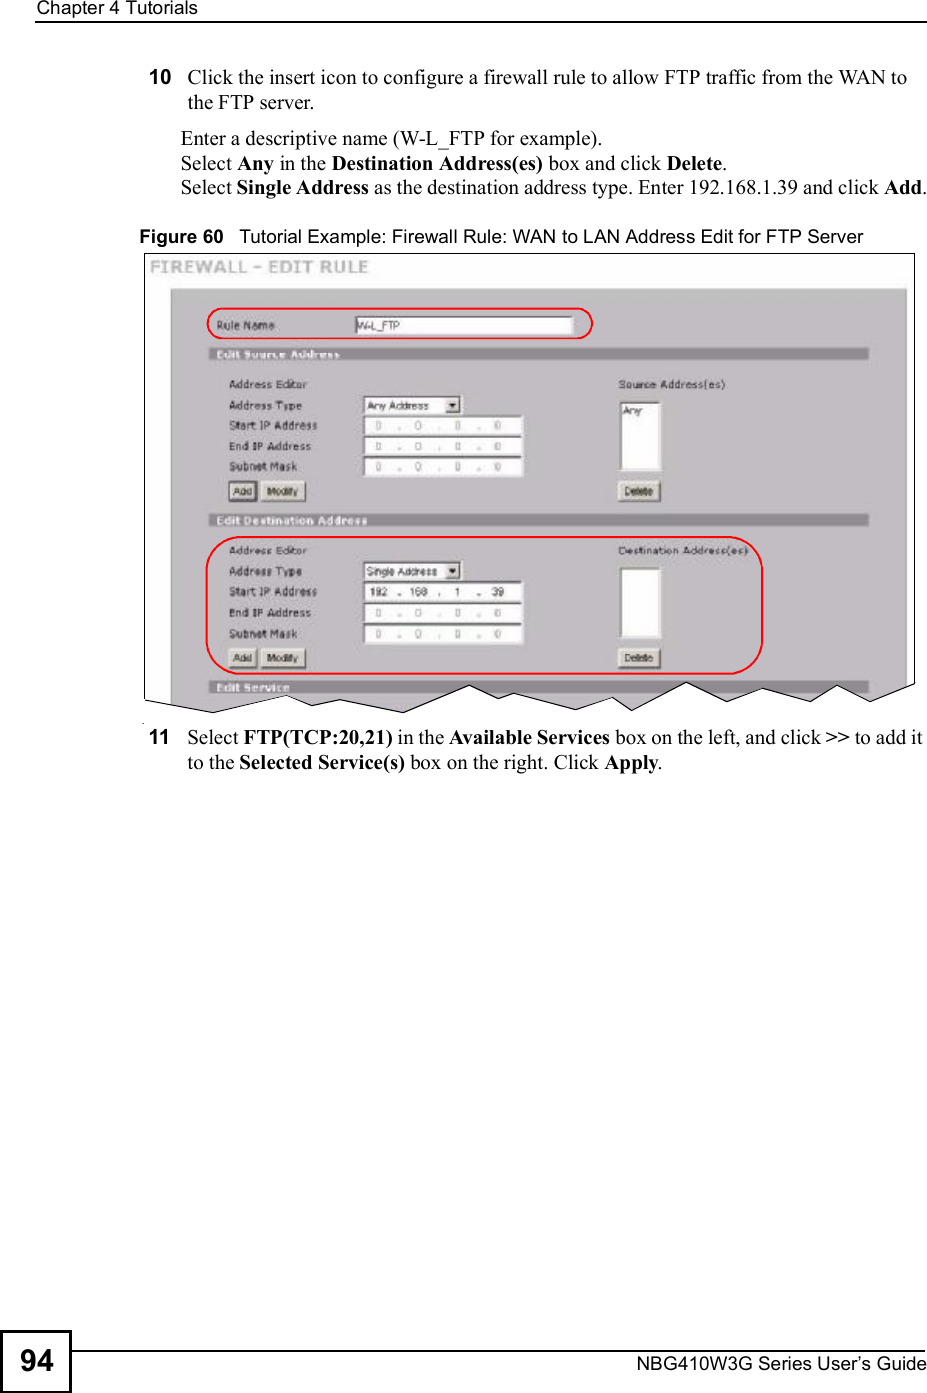 Chapter 4TutorialsNBG410W3G Series User s Guide9410 Click the insert icon to configure a firewall rule to allow FTP traffic from the WAN to the FTP server.Enter a descriptive name (W-L_FTP for example). Select Any in the Destination Address(es) box and click Delete.Select Single Address as the destination address type. Enter 192.168.1.39 and click Add.Figure 60   Tutorial Example: Firewall Rule: WAN to LAN Address Edit for FTP Server 11 Select FTP(TCP:20,21) in the Available Services box on the left, and click &gt;&gt; to add it to the Selected Service(s) box on the right. Click Apply.